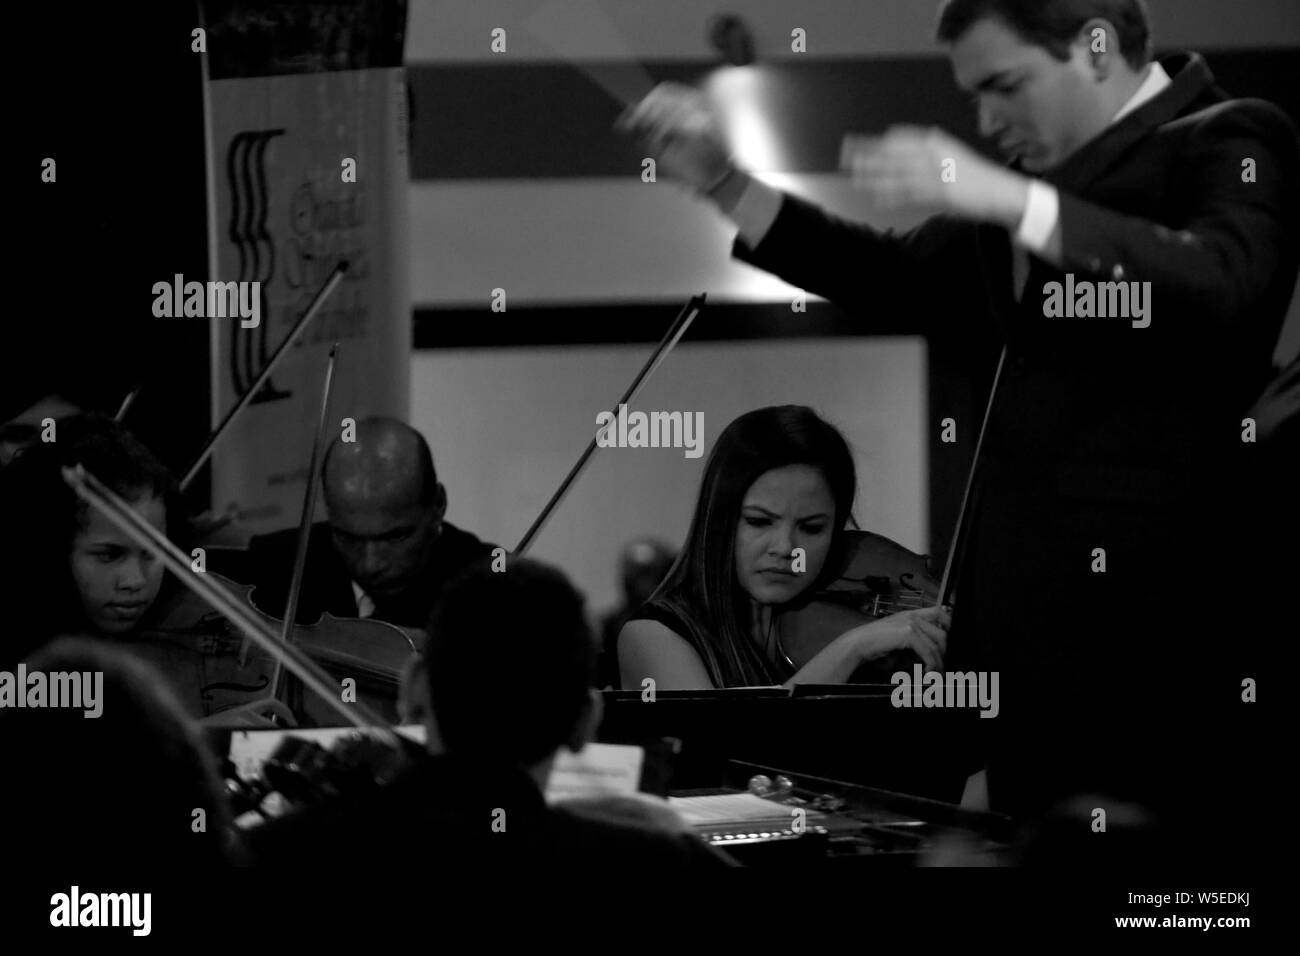 July 28, 2019, Valencia, Carabobo, Venezuela: July 28, 2019. The symphony orchestra of the Carabobo state delights more than a thousand people present at the concert offered at the facilities of the Hesperia WTC hotel in the city of Valencia, Carabobo state. Photo: Juan Carlos Hernandez Credit: Juan Carlos Hernandez/ZUMA Wire/Alamy Live News Stock Photo